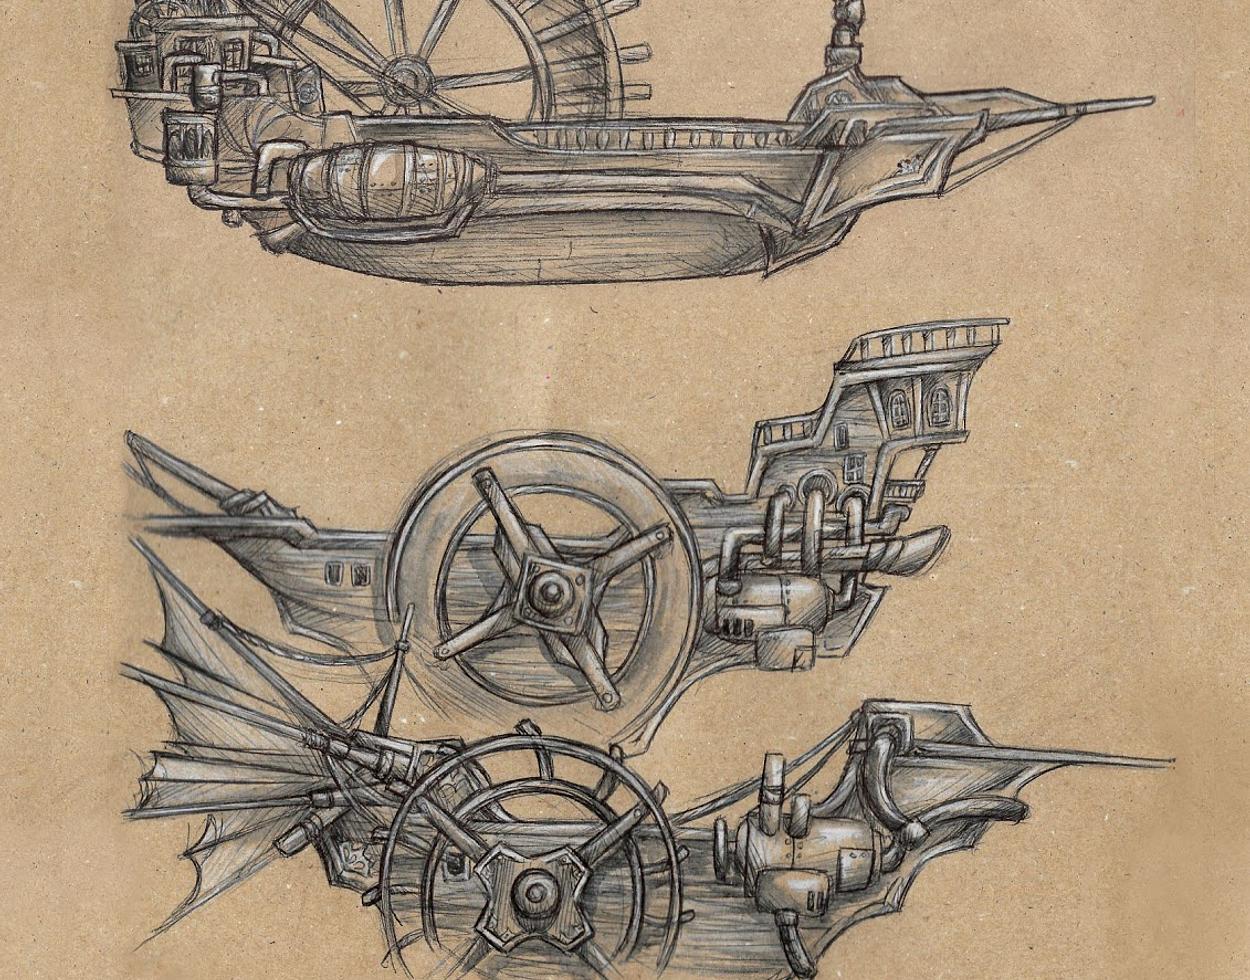 first ship concept art, however we decided to go with a different design instead